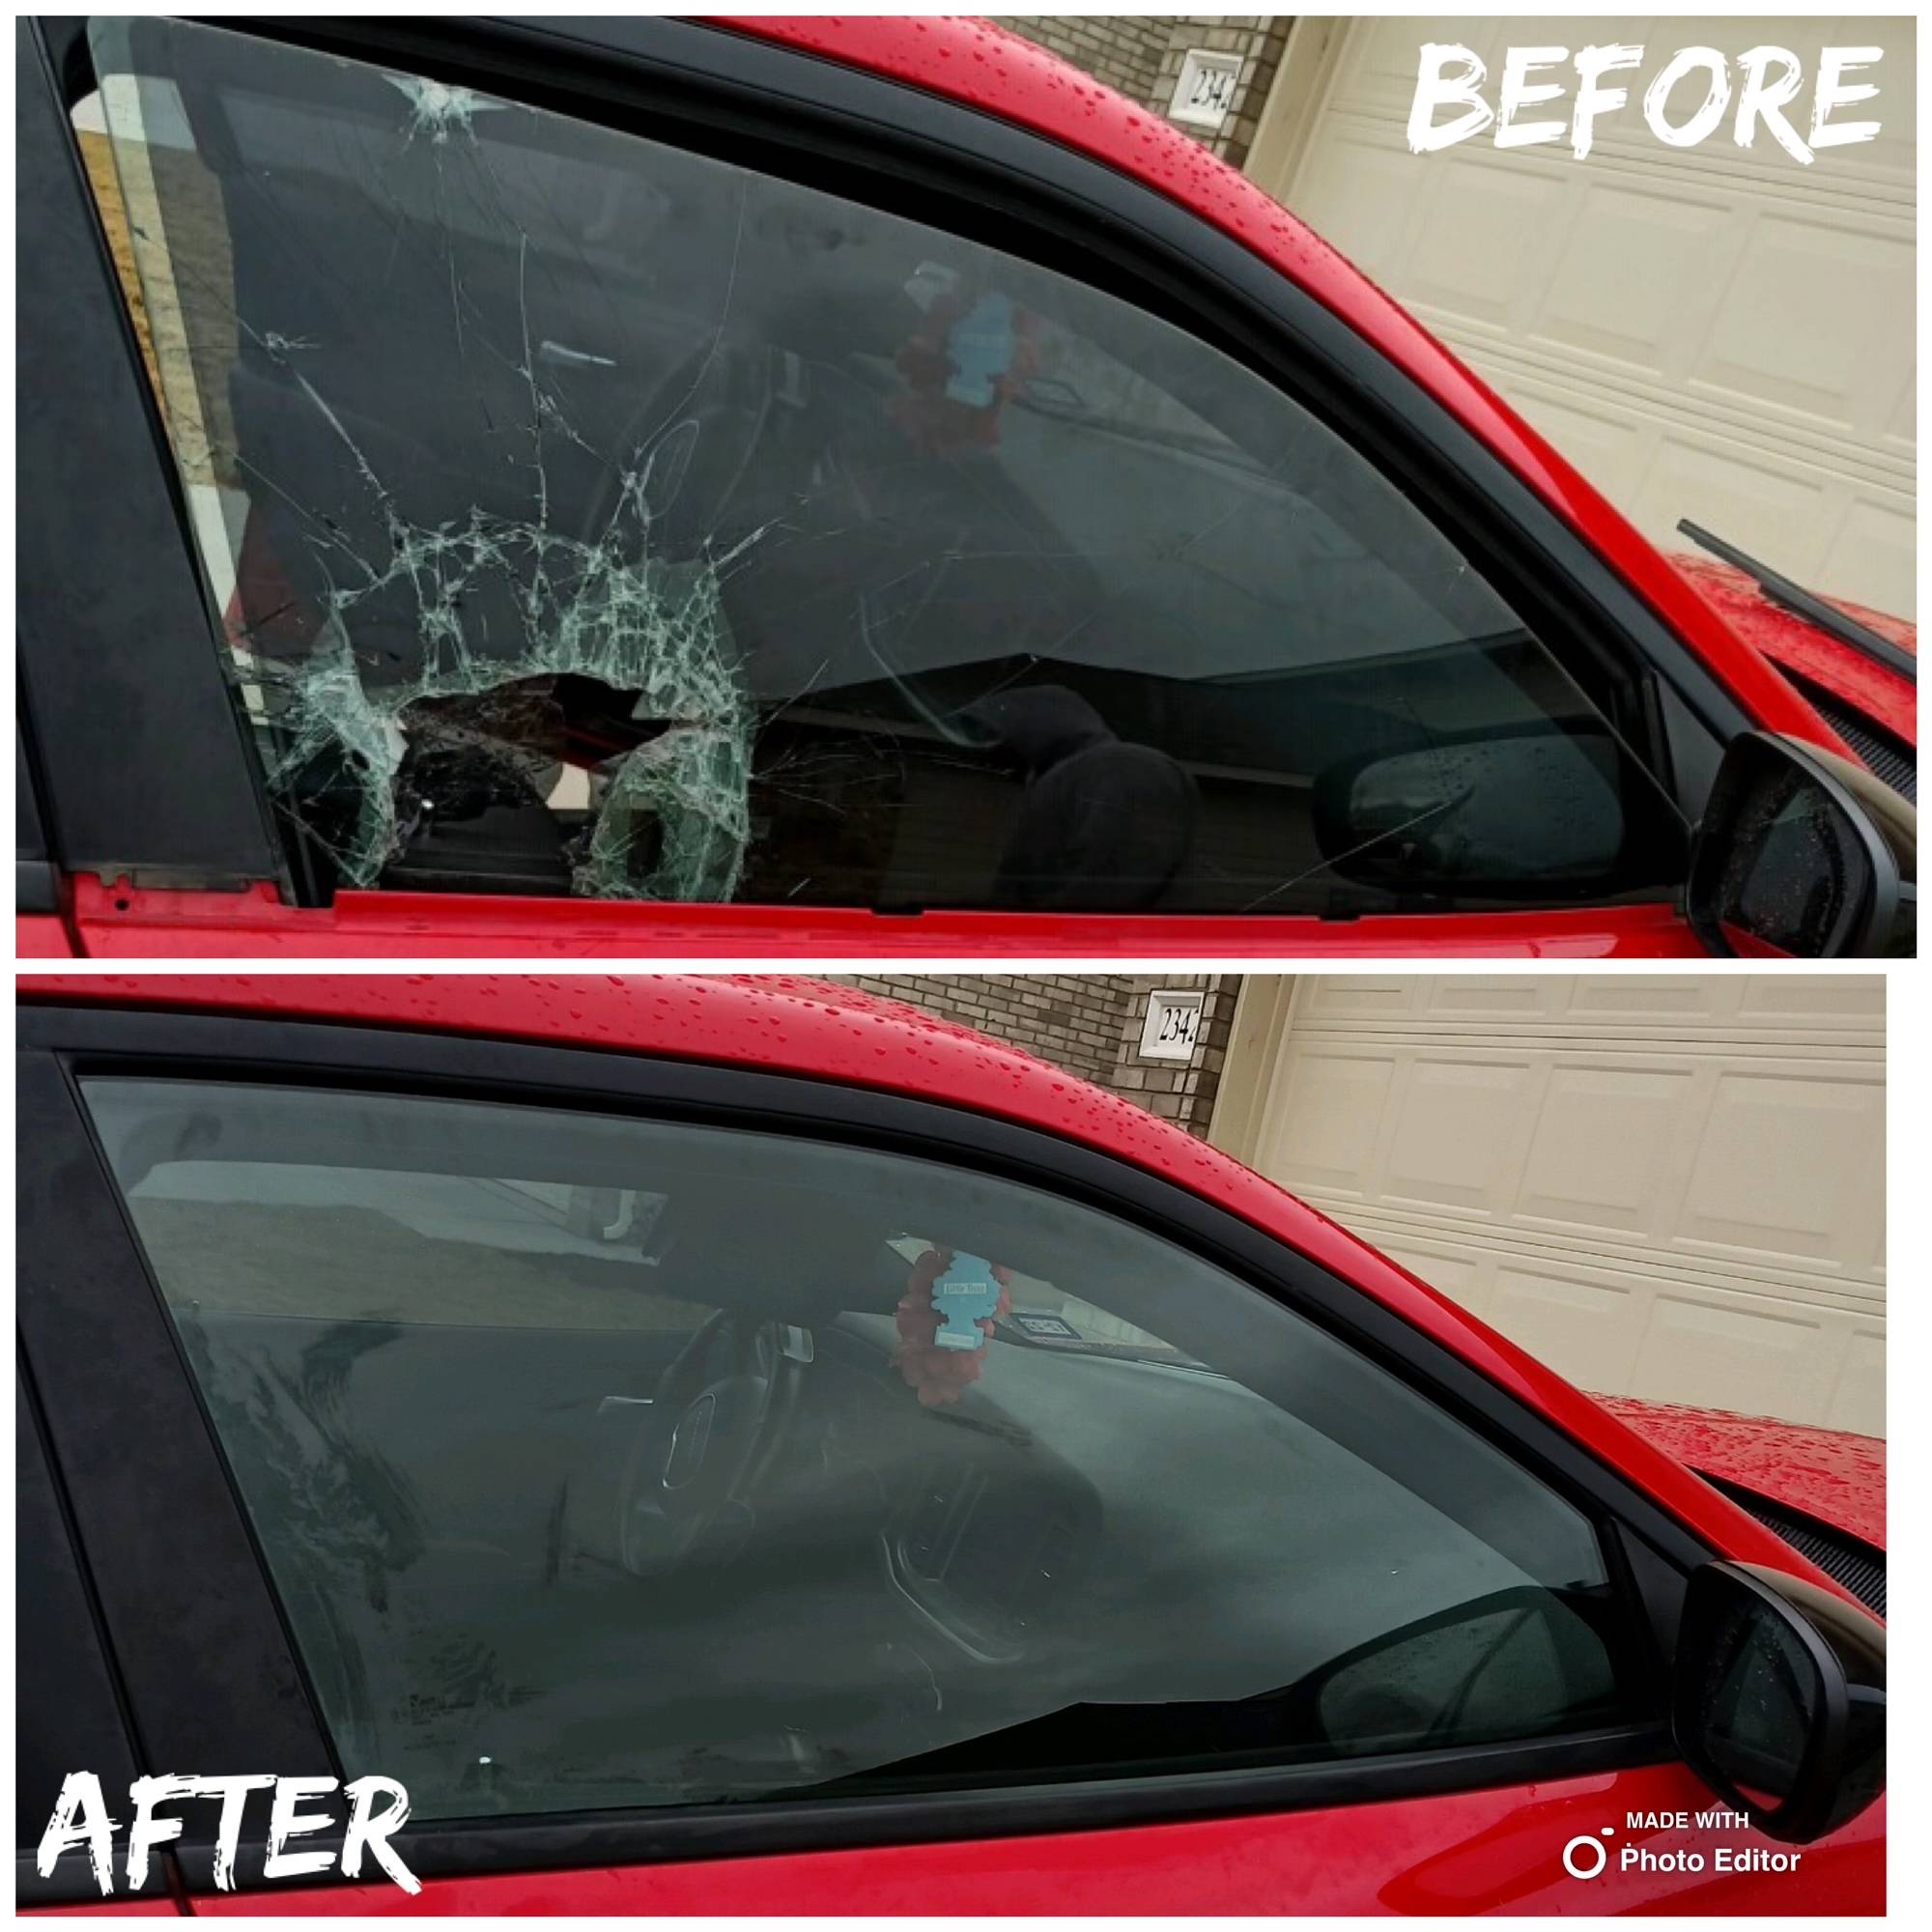 A split image showcasing a before-and-after comparison of a 2014 Dodge Charger's passenger side right front laminated door glass in Sea World, San Antonio, Texas. The top half displays the severe damage with numerous cracks from an attempted burglary. The bottom half illustrates the repaired state of the door glass after a home auto glass appointment.